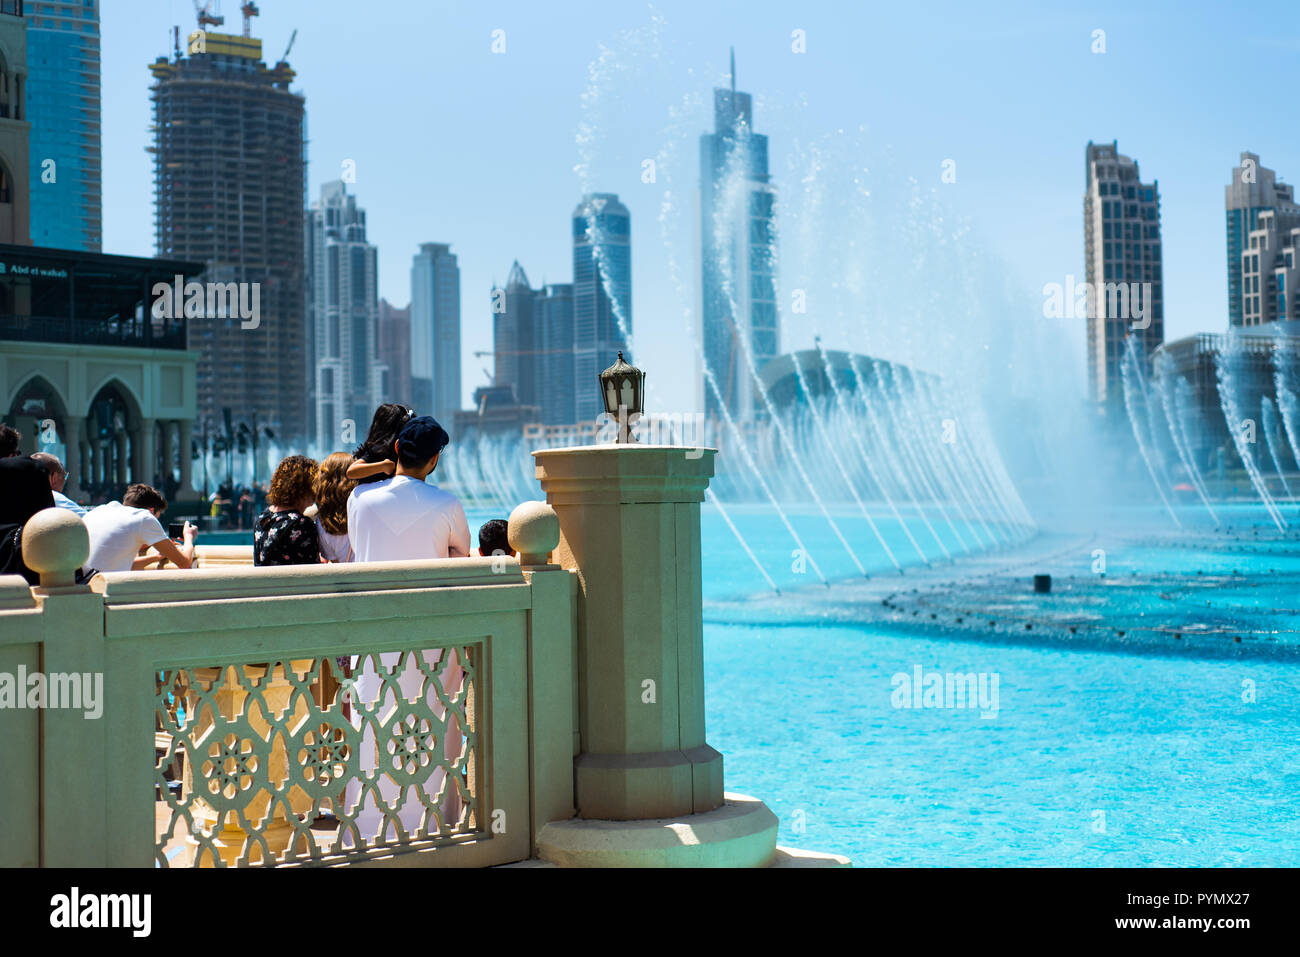 Dubai, United Arab Emirates - March 26, 2018: People gather around the Dubai mall fountain to see the water show which attracts many tourist every day Stock Photo